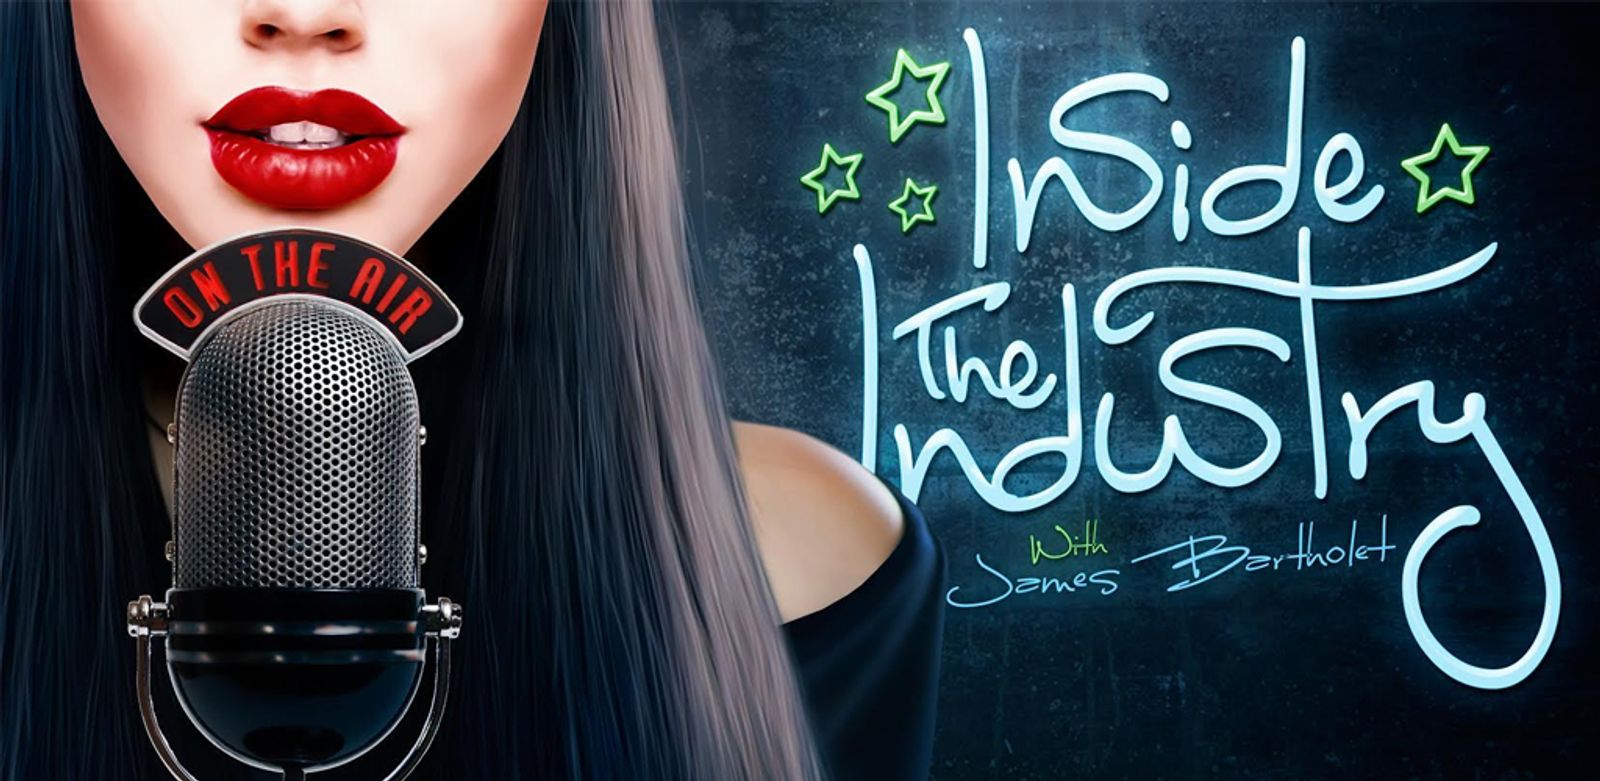 Azluv, Chibbles, and More on 'Inside the Industry' Tonight